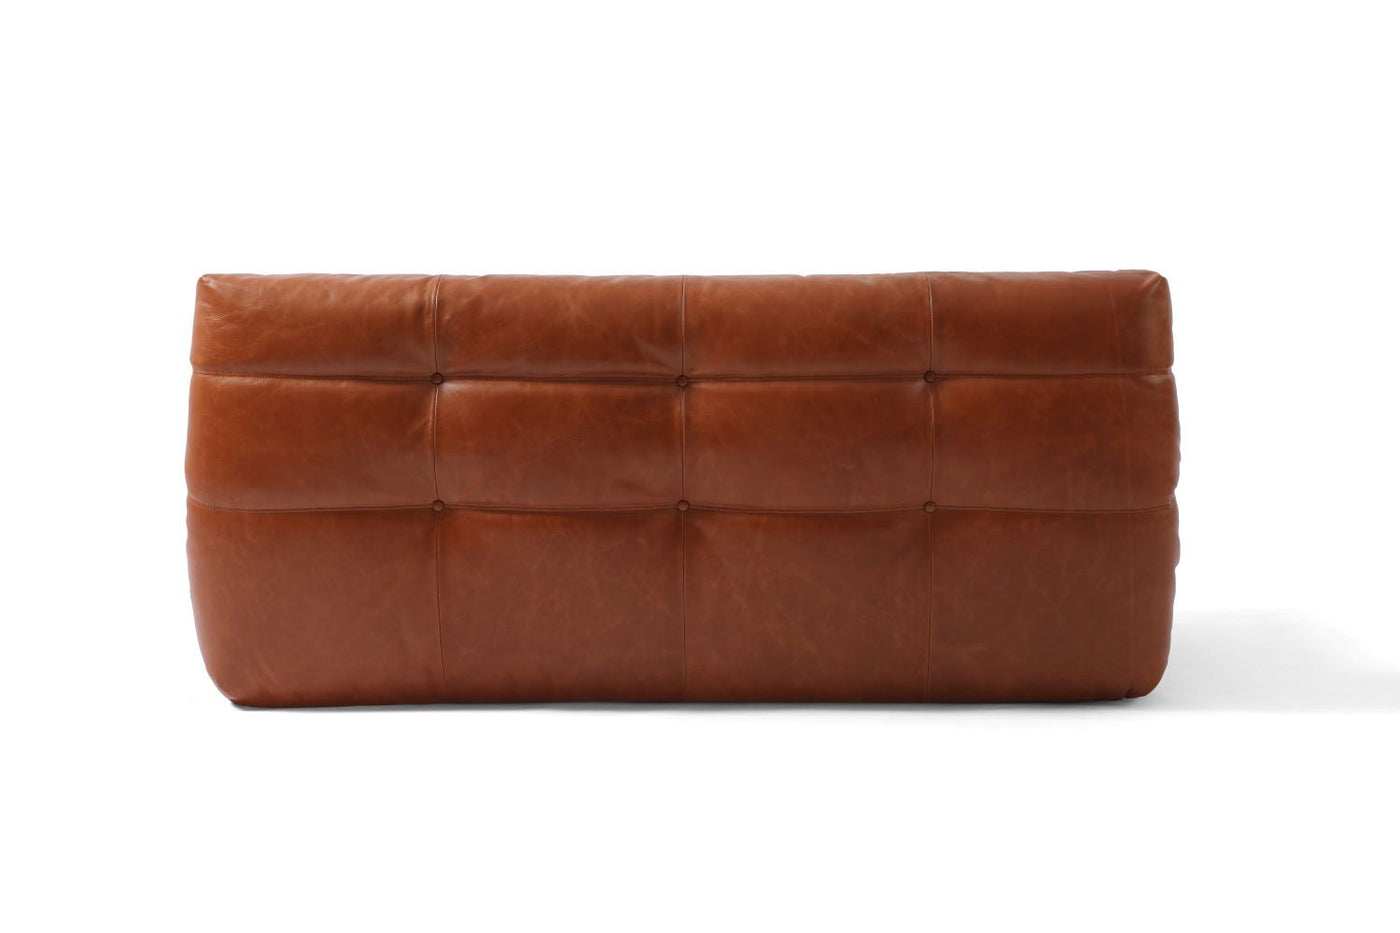 Russo2 Sofa in Vintage leather